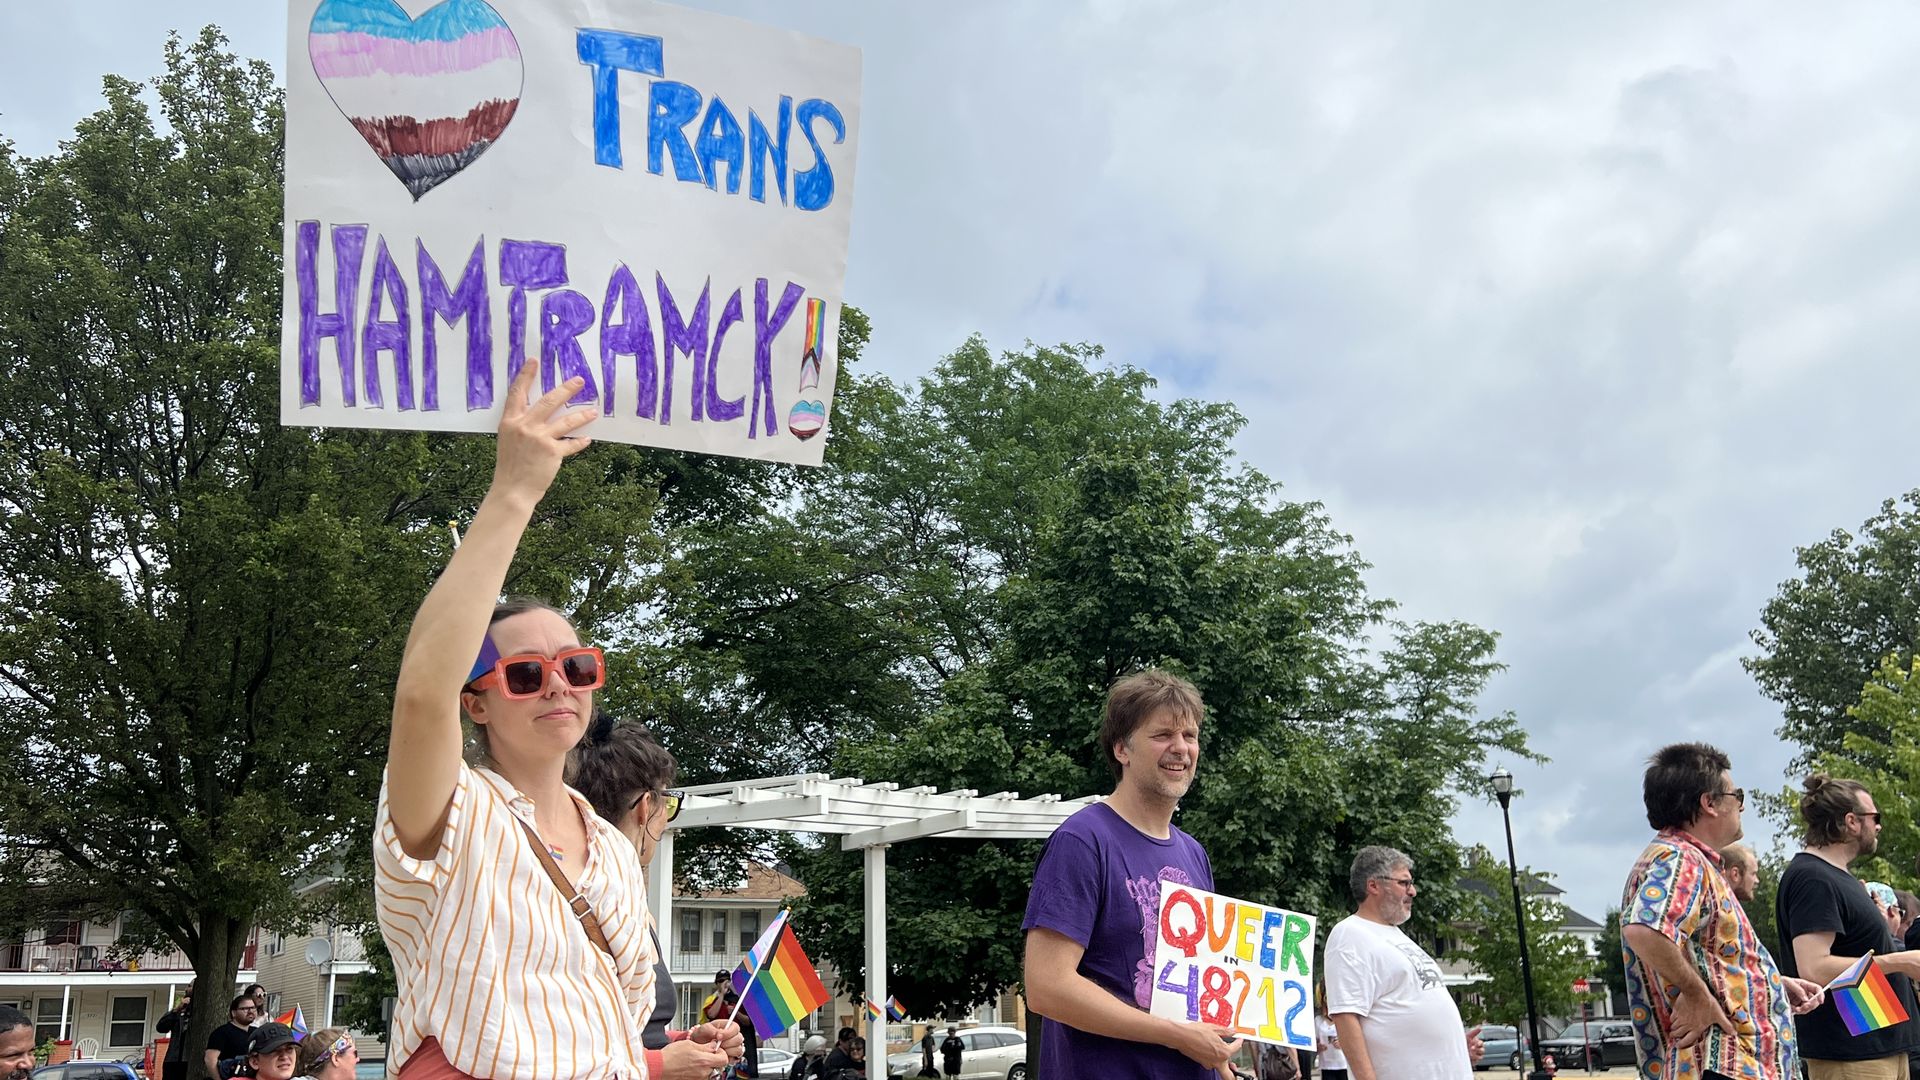 Detroit-area city bans Pride flags on public property after debate on  LGBTQ+ discrimination and religion